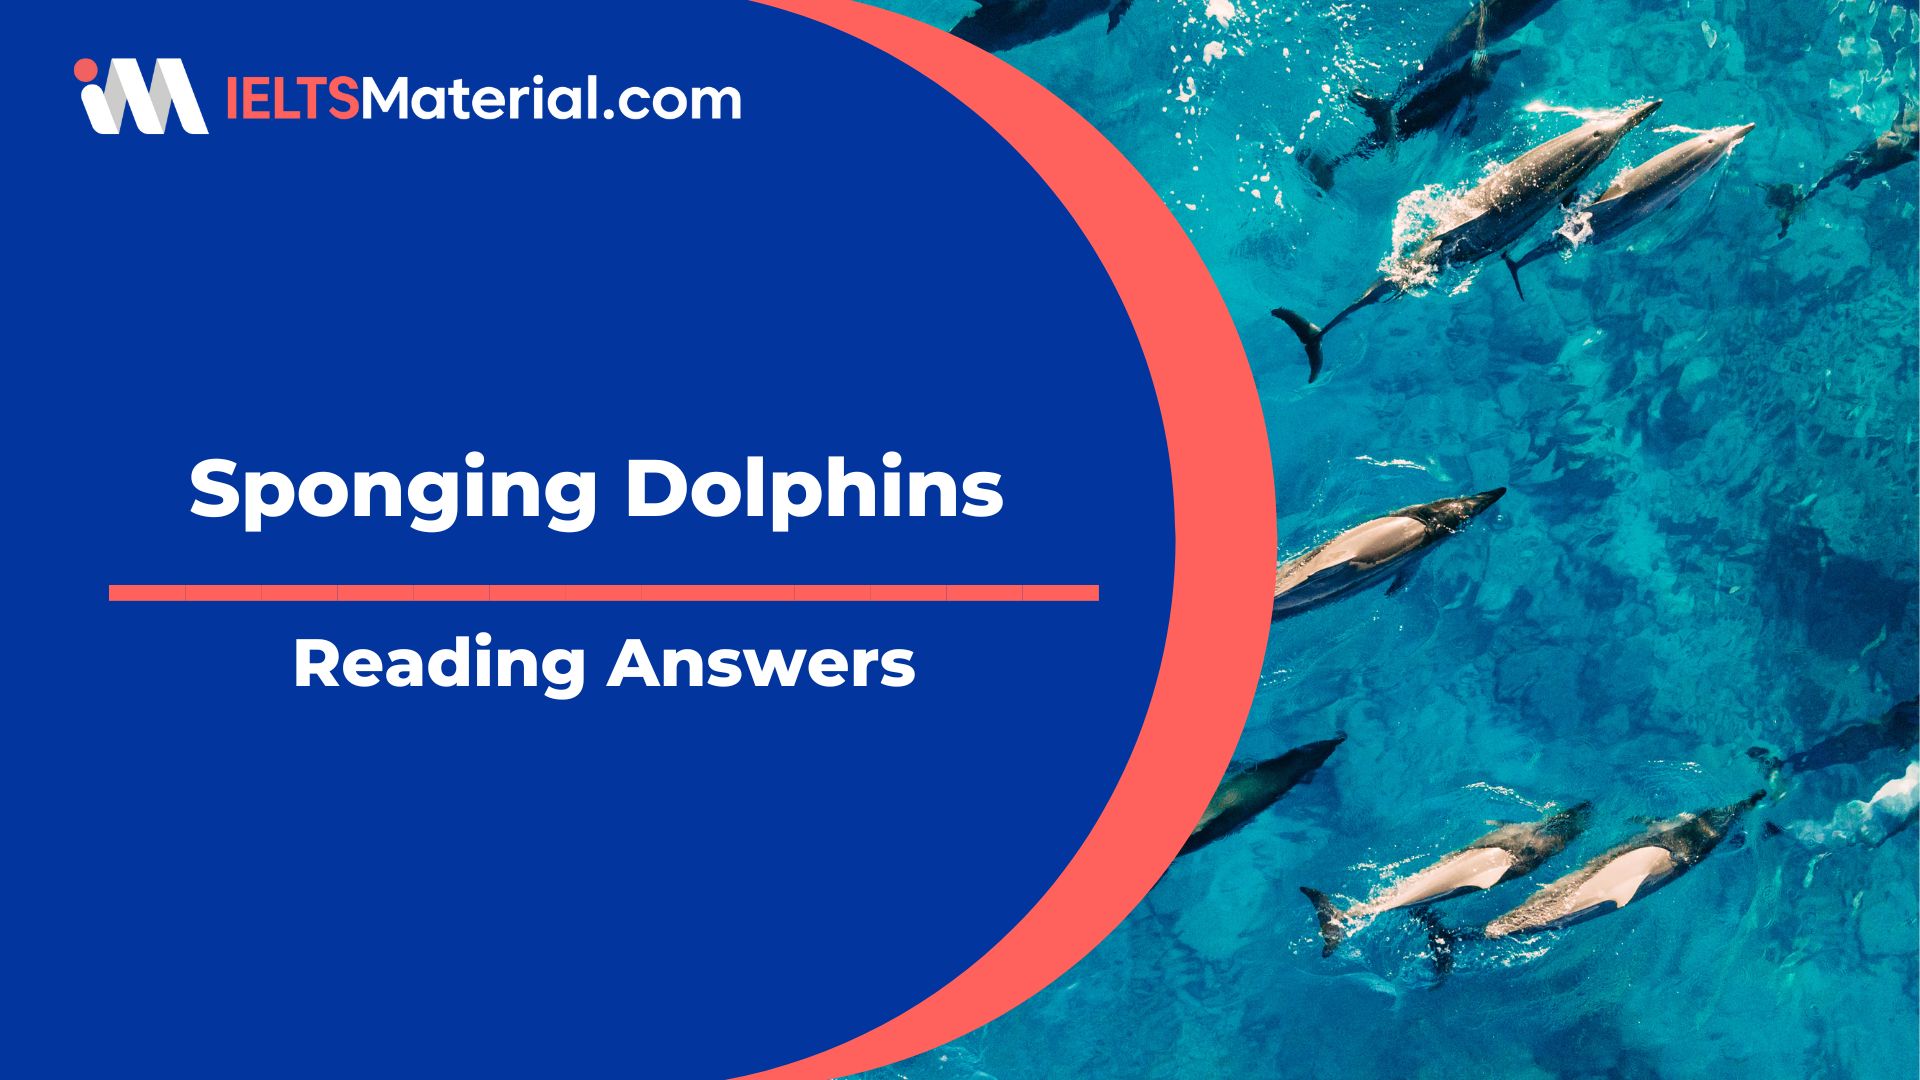 Sponging Dolphins Reading Answers